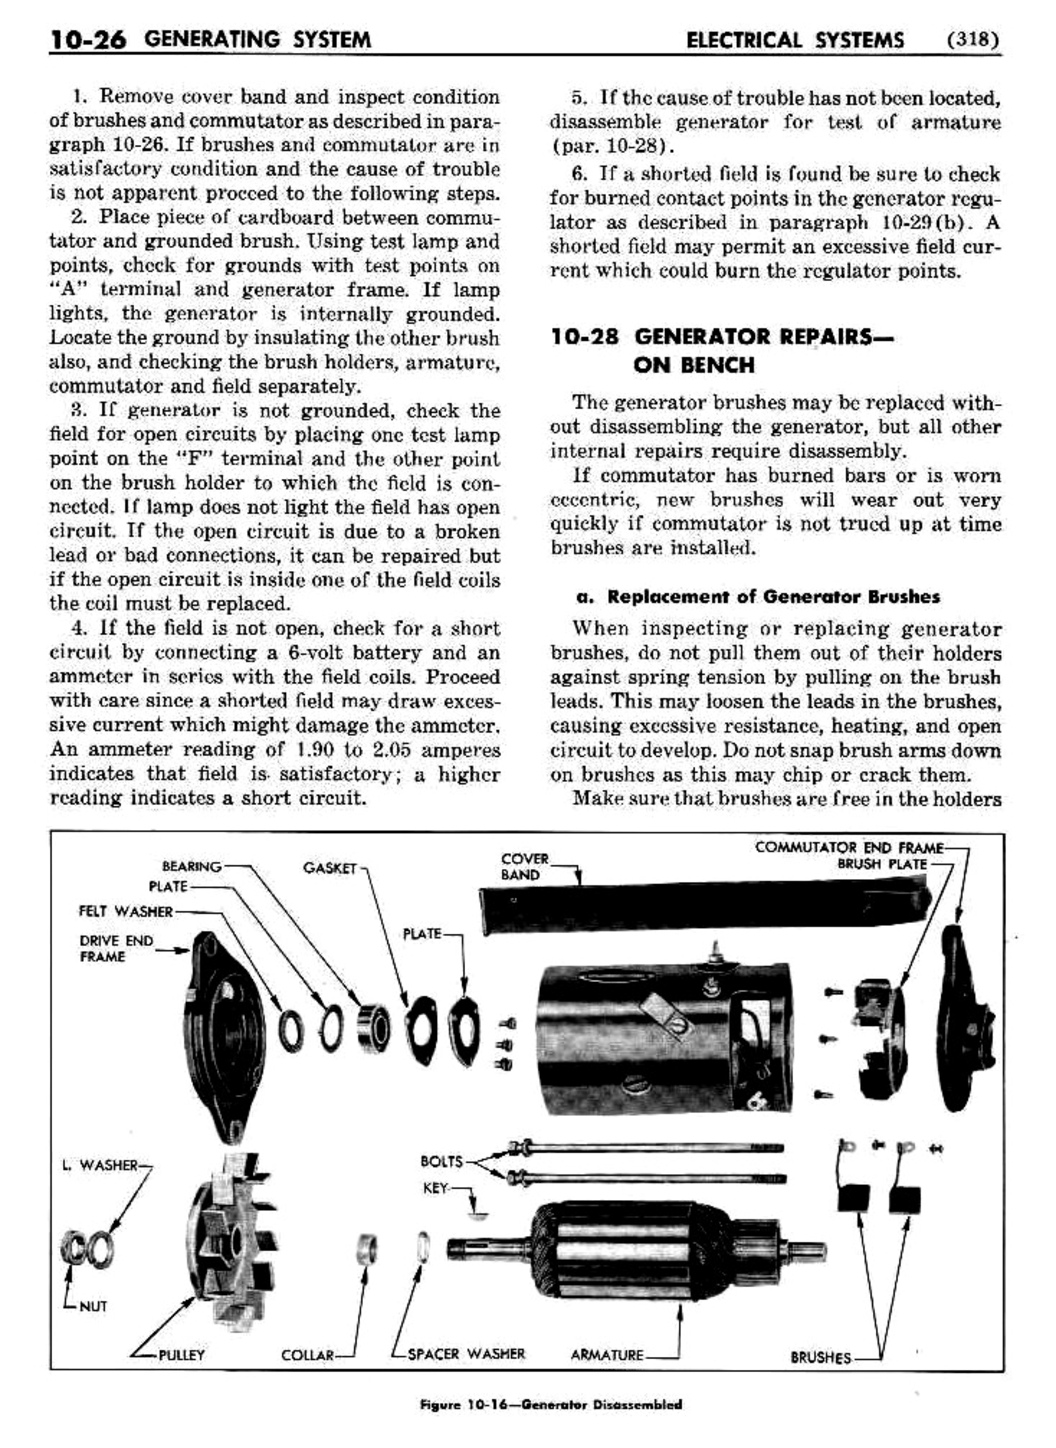 n_11 1951 Buick Shop Manual - Electrical Systems-026-026.jpg